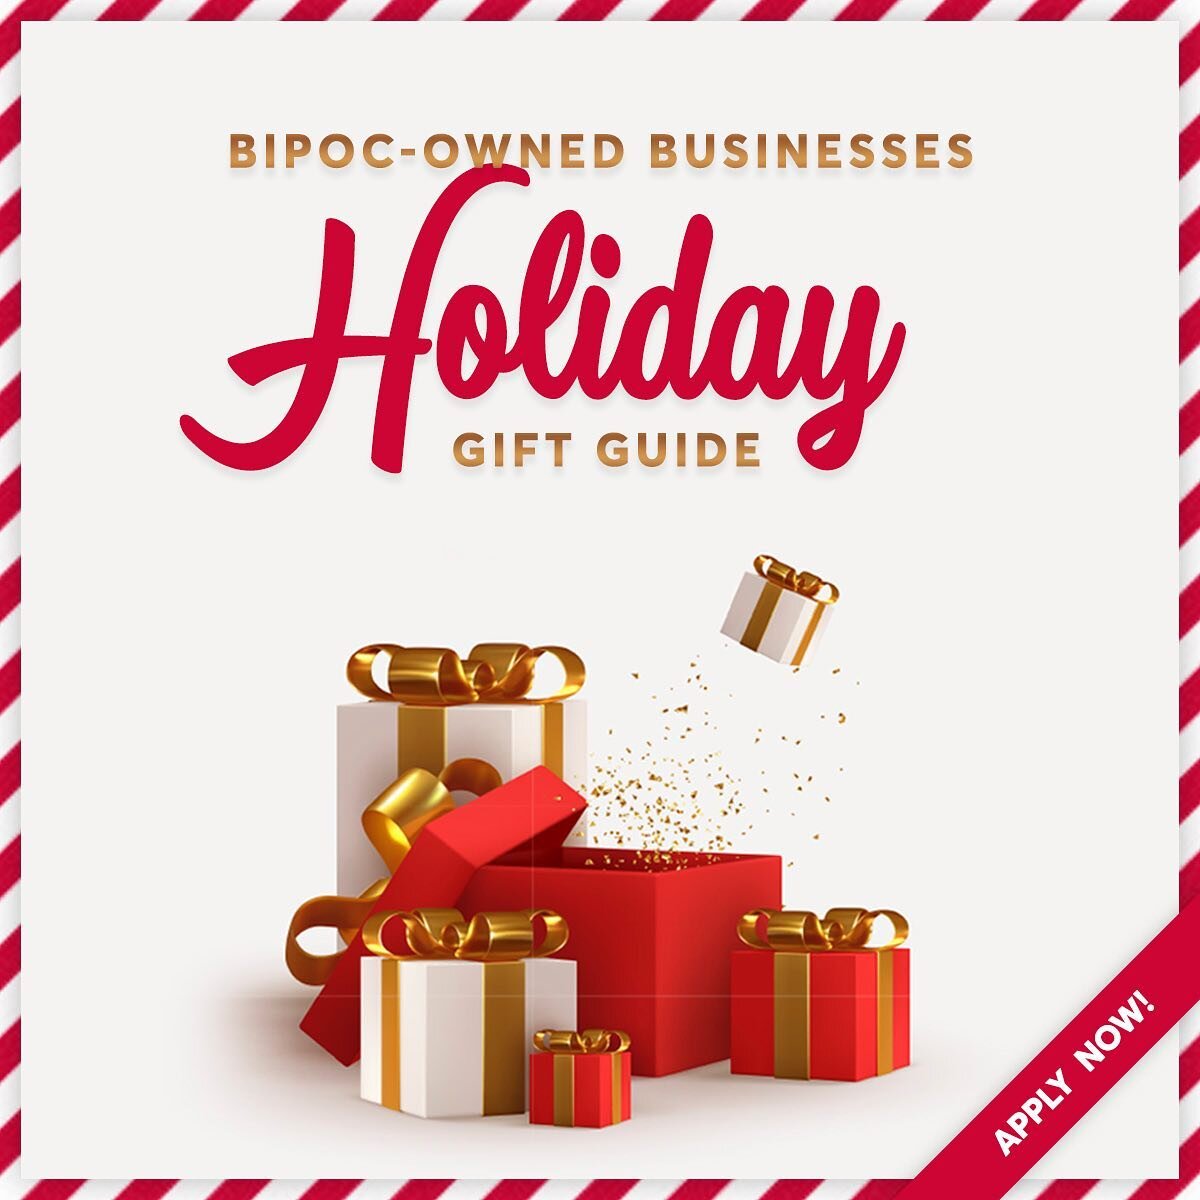 Help us find the best BIPOC-owned businesses for our 2021 Holiday Gift Guide! Throughout the month, we&rsquo;re seeking applications from BIPOC-owned small businesses focused on beauty, fashion, home decor and other gift items for our guide. Nominate your favorite shop or apply now by visiting our link in bio. #kargokares